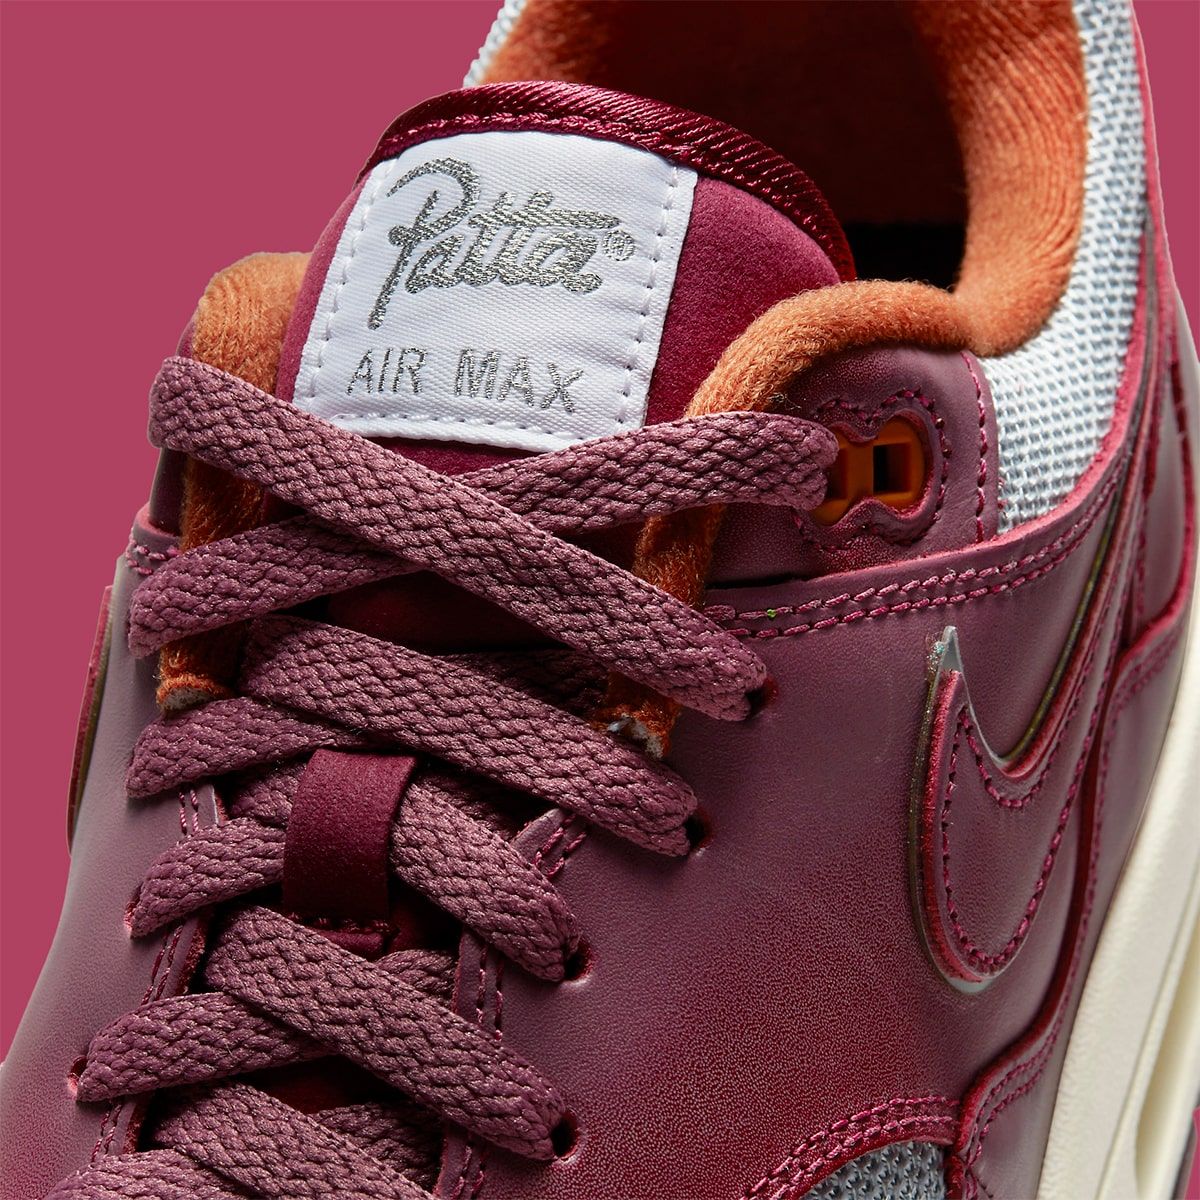 Where to Buy the Patta x Nike Air Max 1 “Night Maroon” | House of